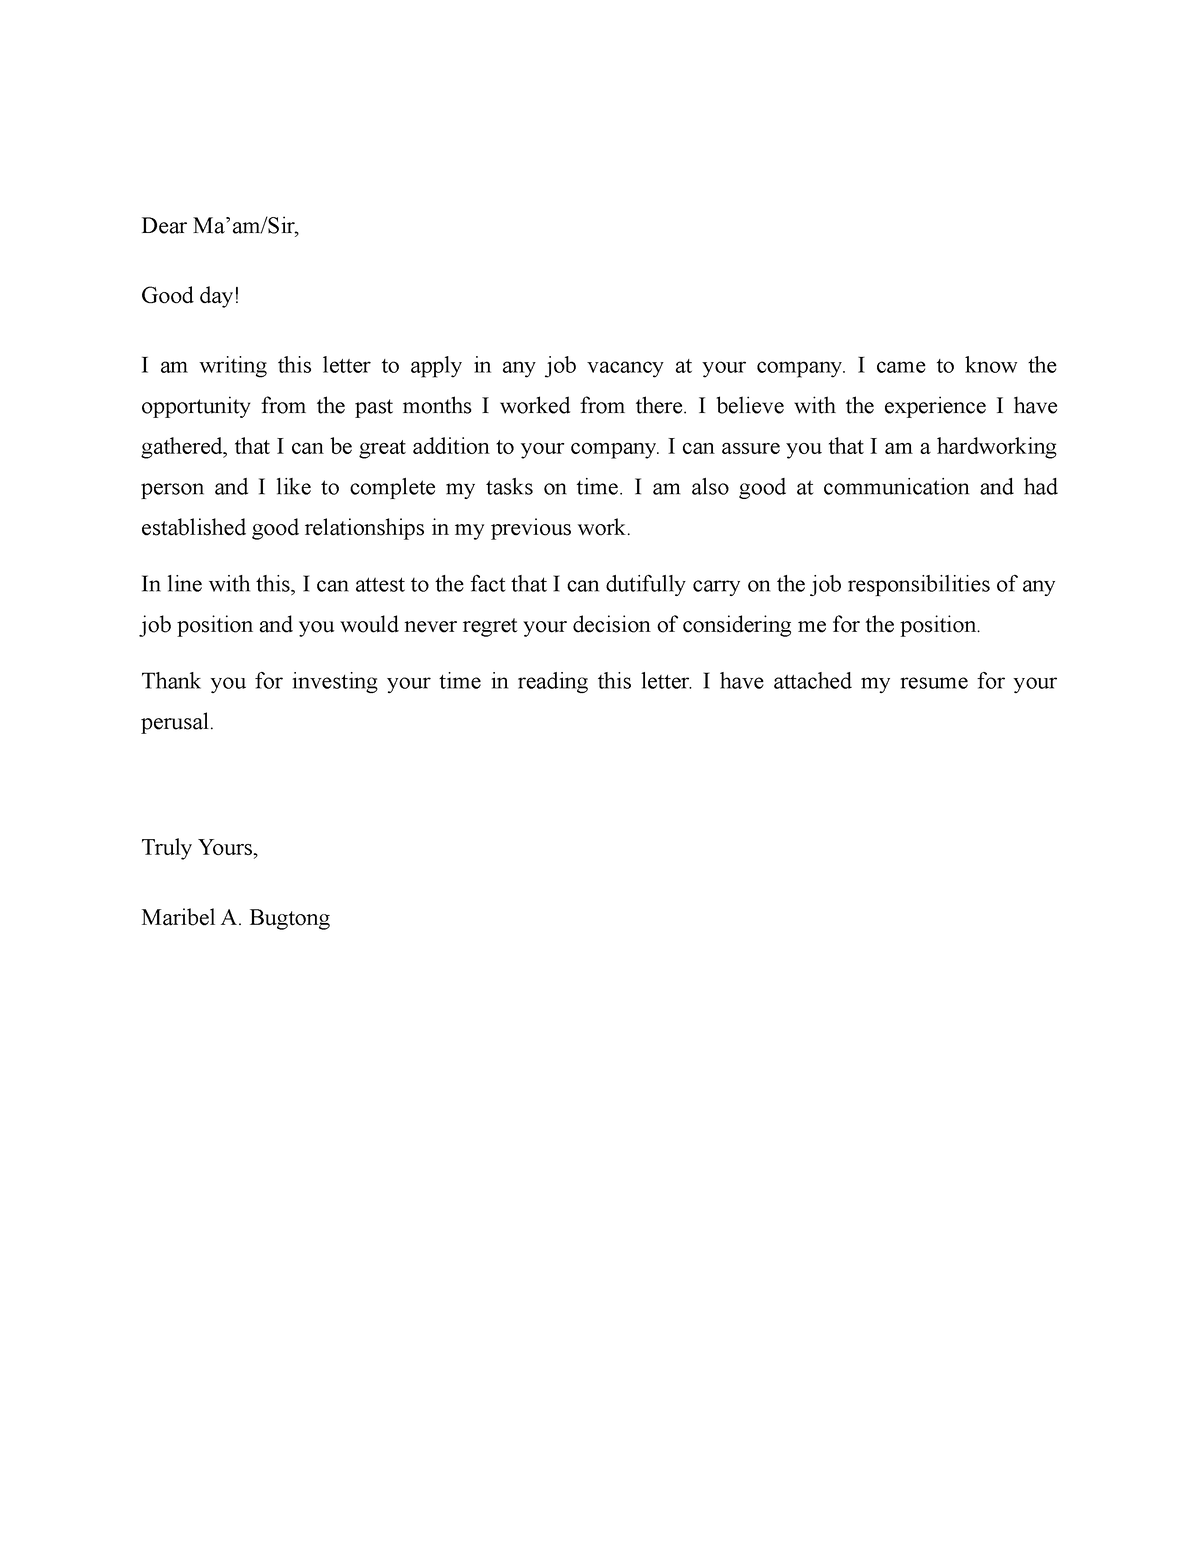 Application Letter - Dear Ma’am/Sir, Good day! I am writing this letter ...